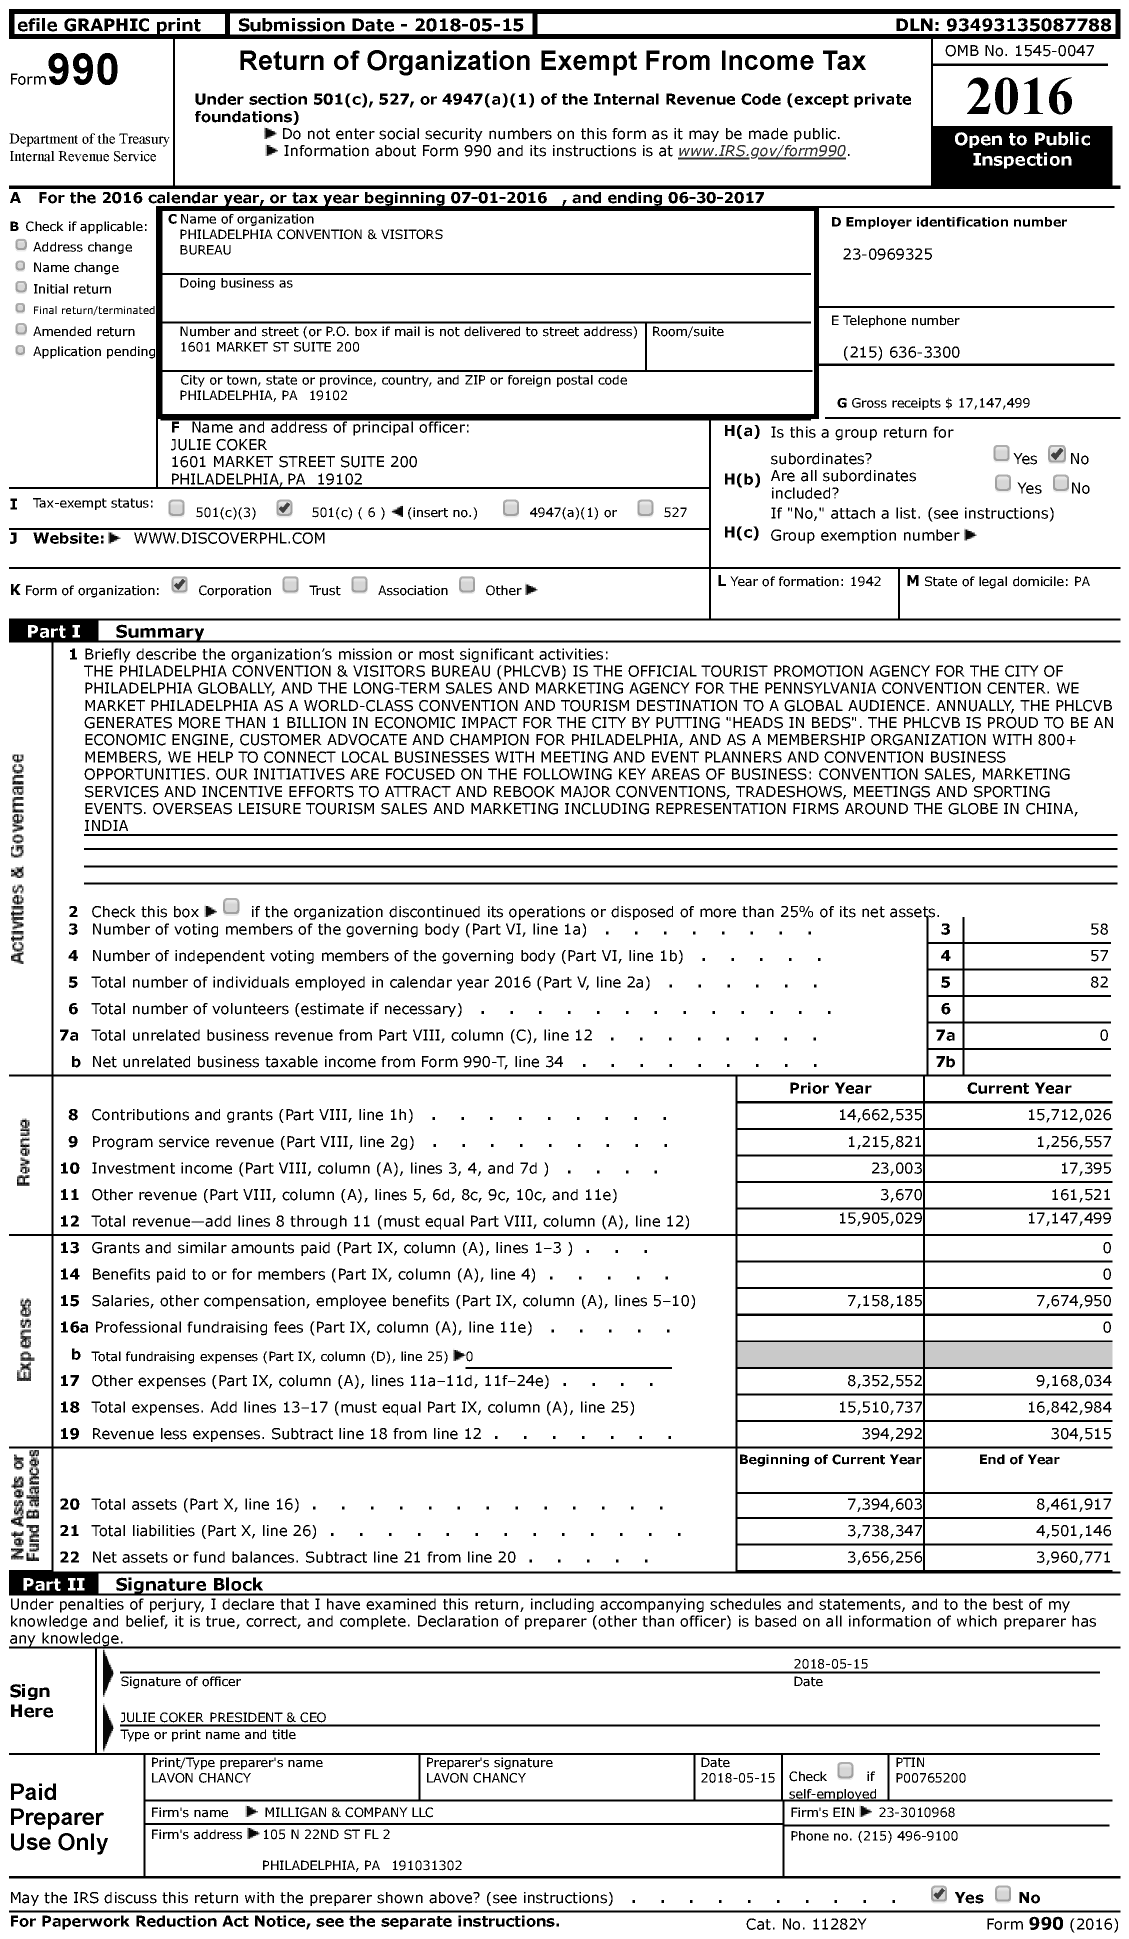 Image of first page of 2016 Form 990 for Philadelphia Convention and Visitors Bureau (PHLCVB)